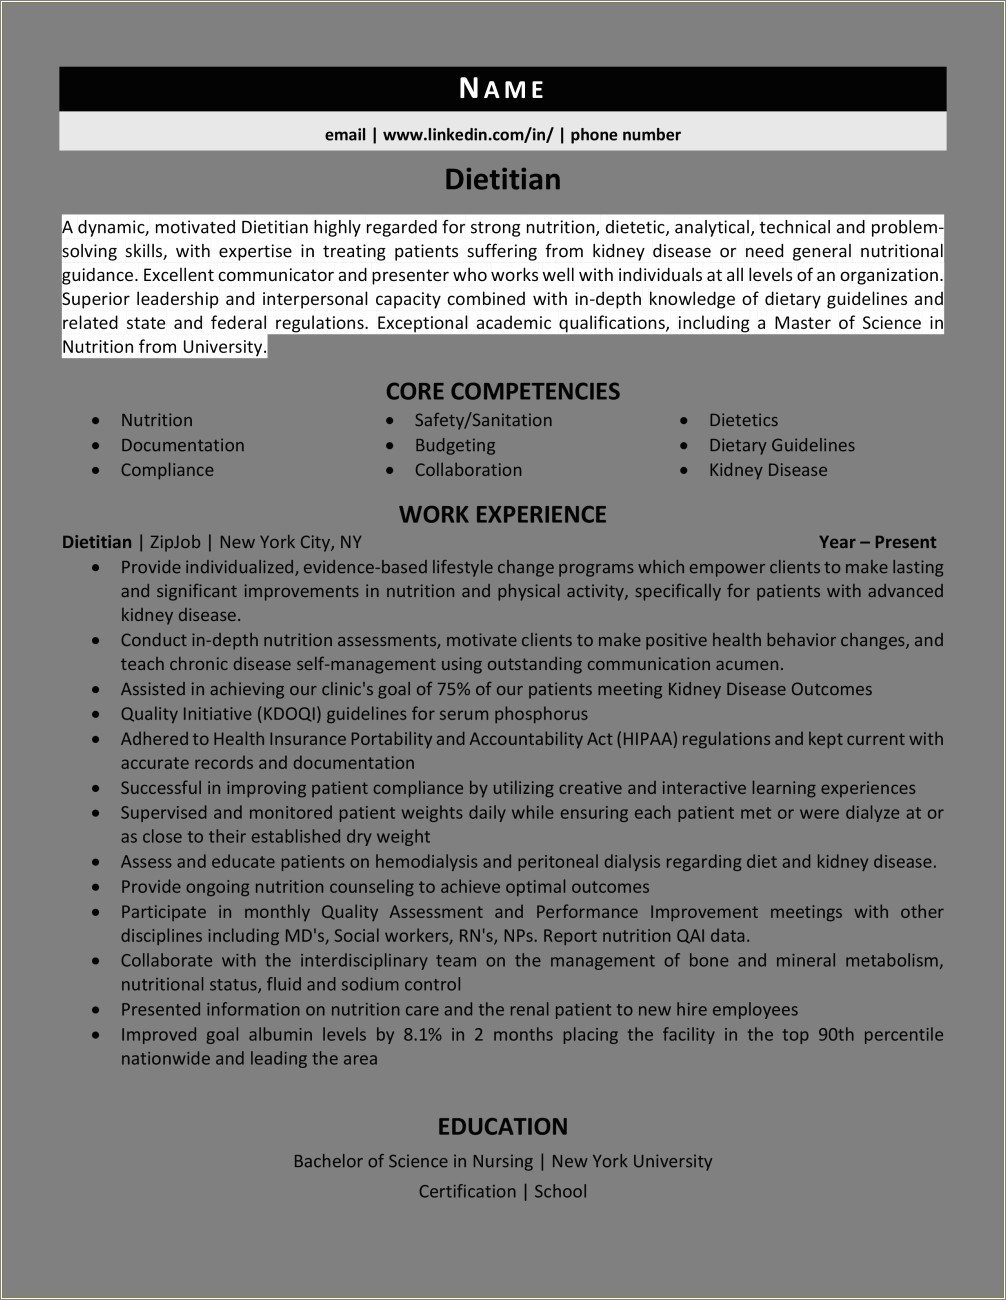 Dietitian Skills And Expertise For Resume